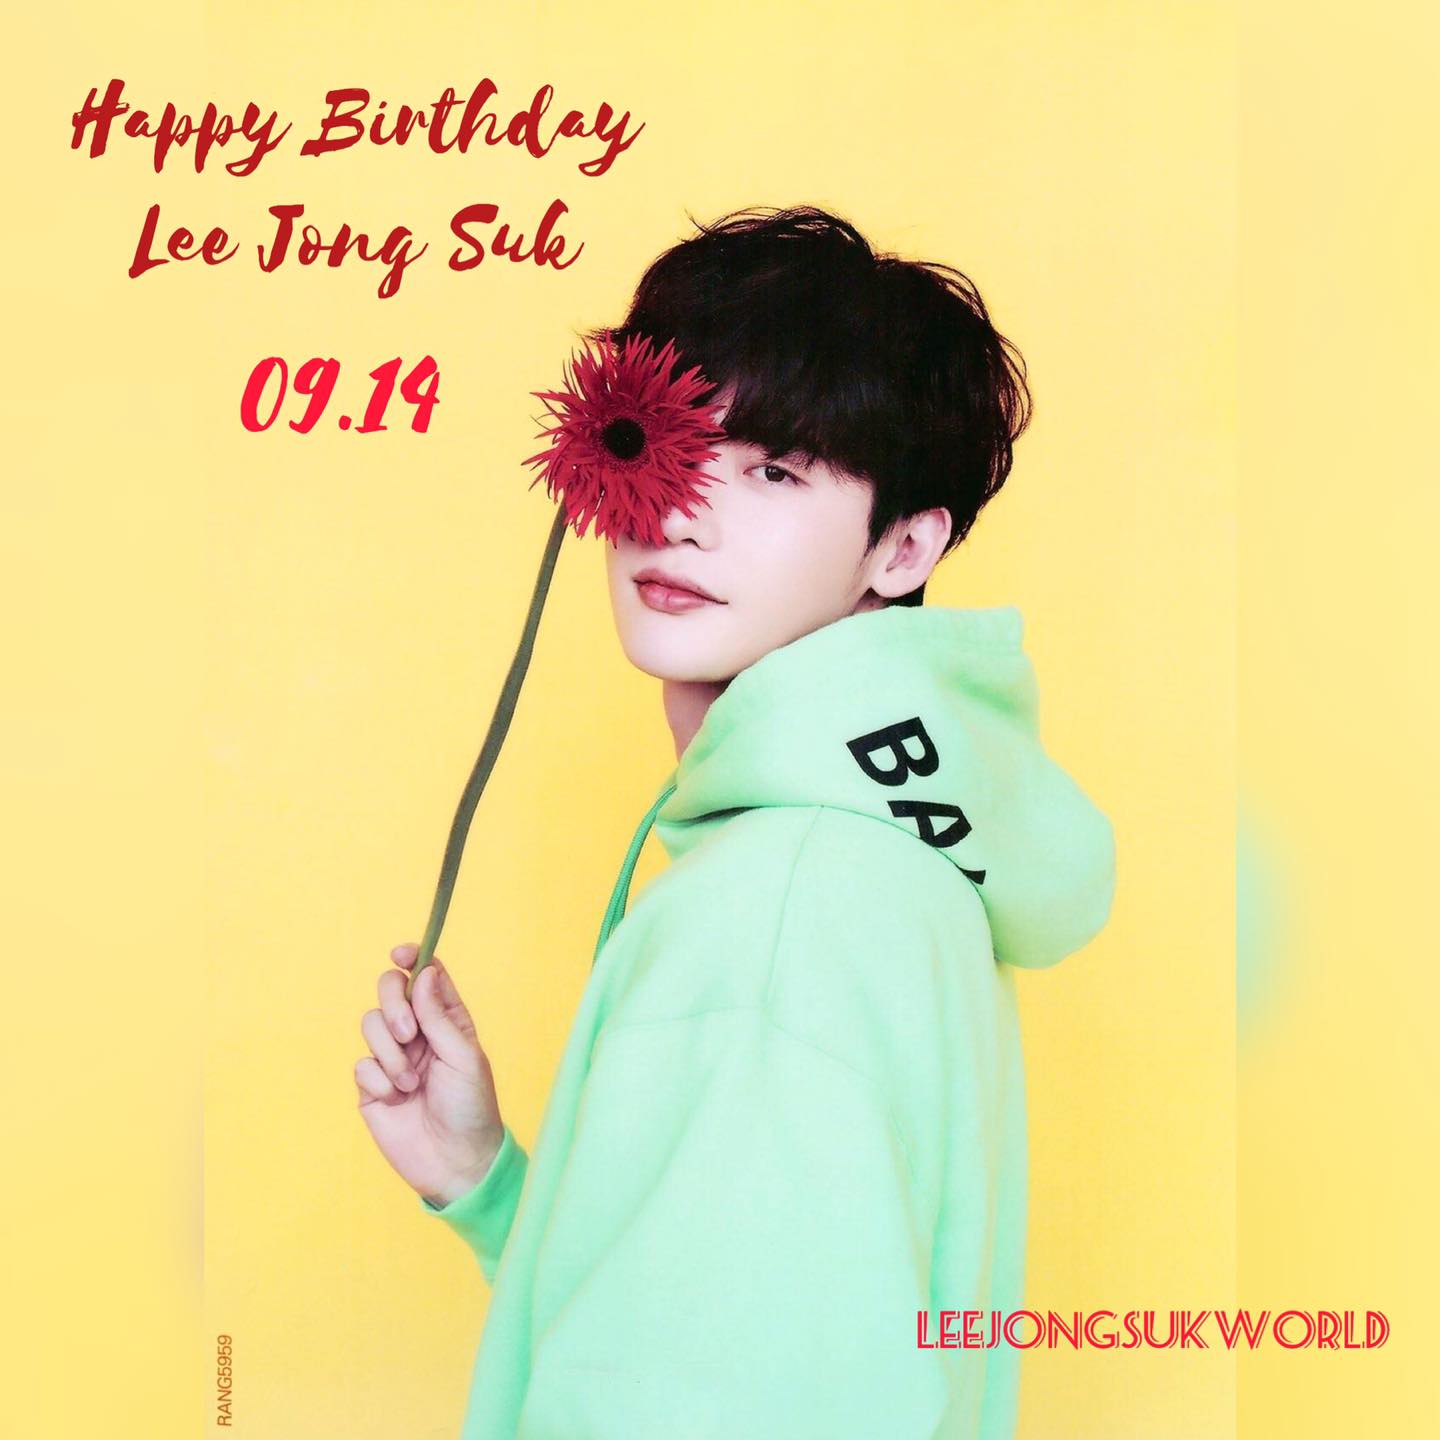 Lee Jong-suk turns 31 today, his series ‘W’ premieres on Trans TV in Indonesia